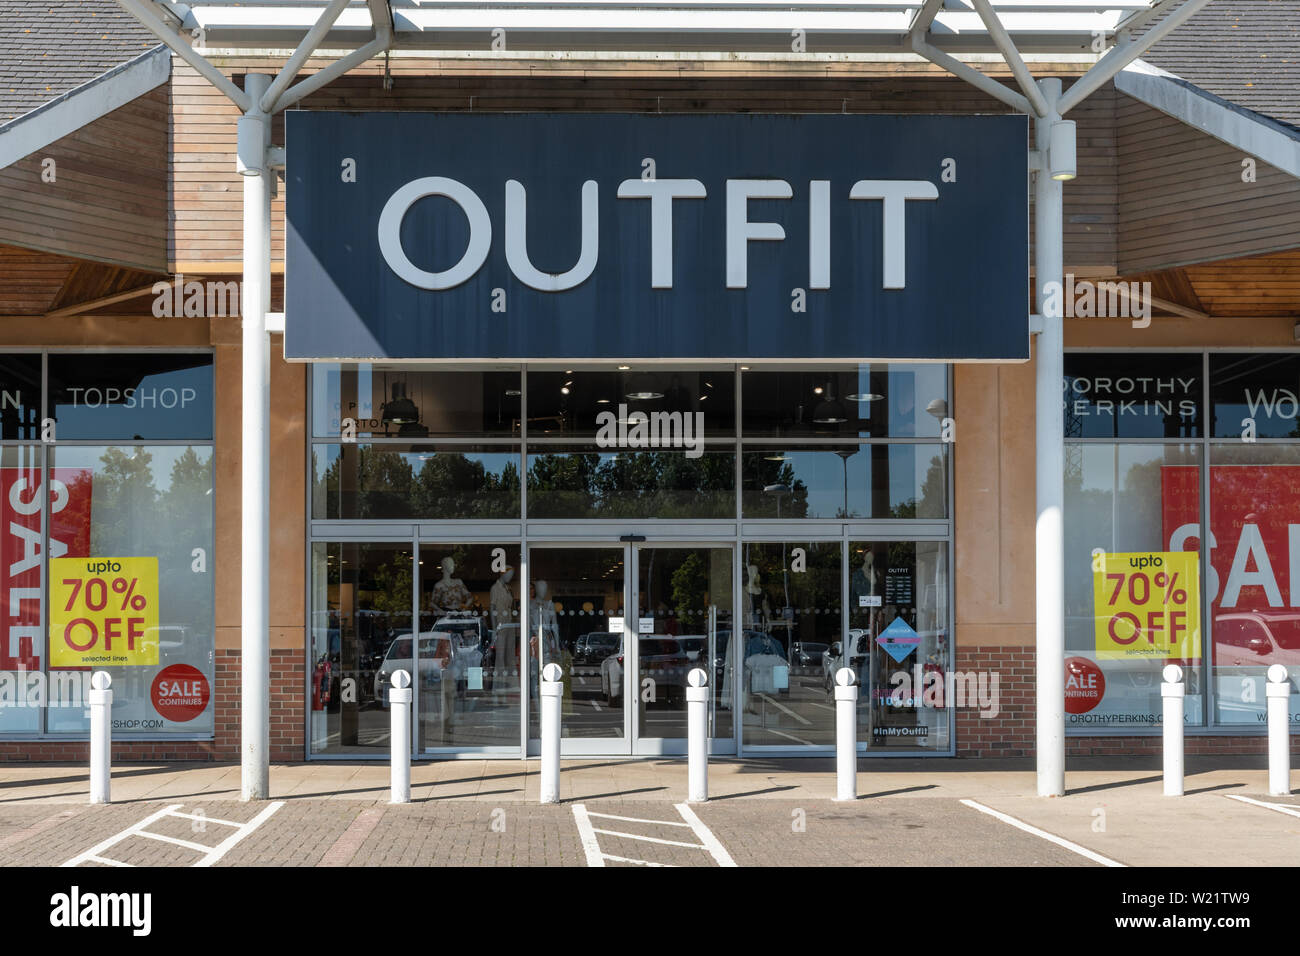 Outfit shop or store, out of town retailer of fashion clothes, UK Stock Photo